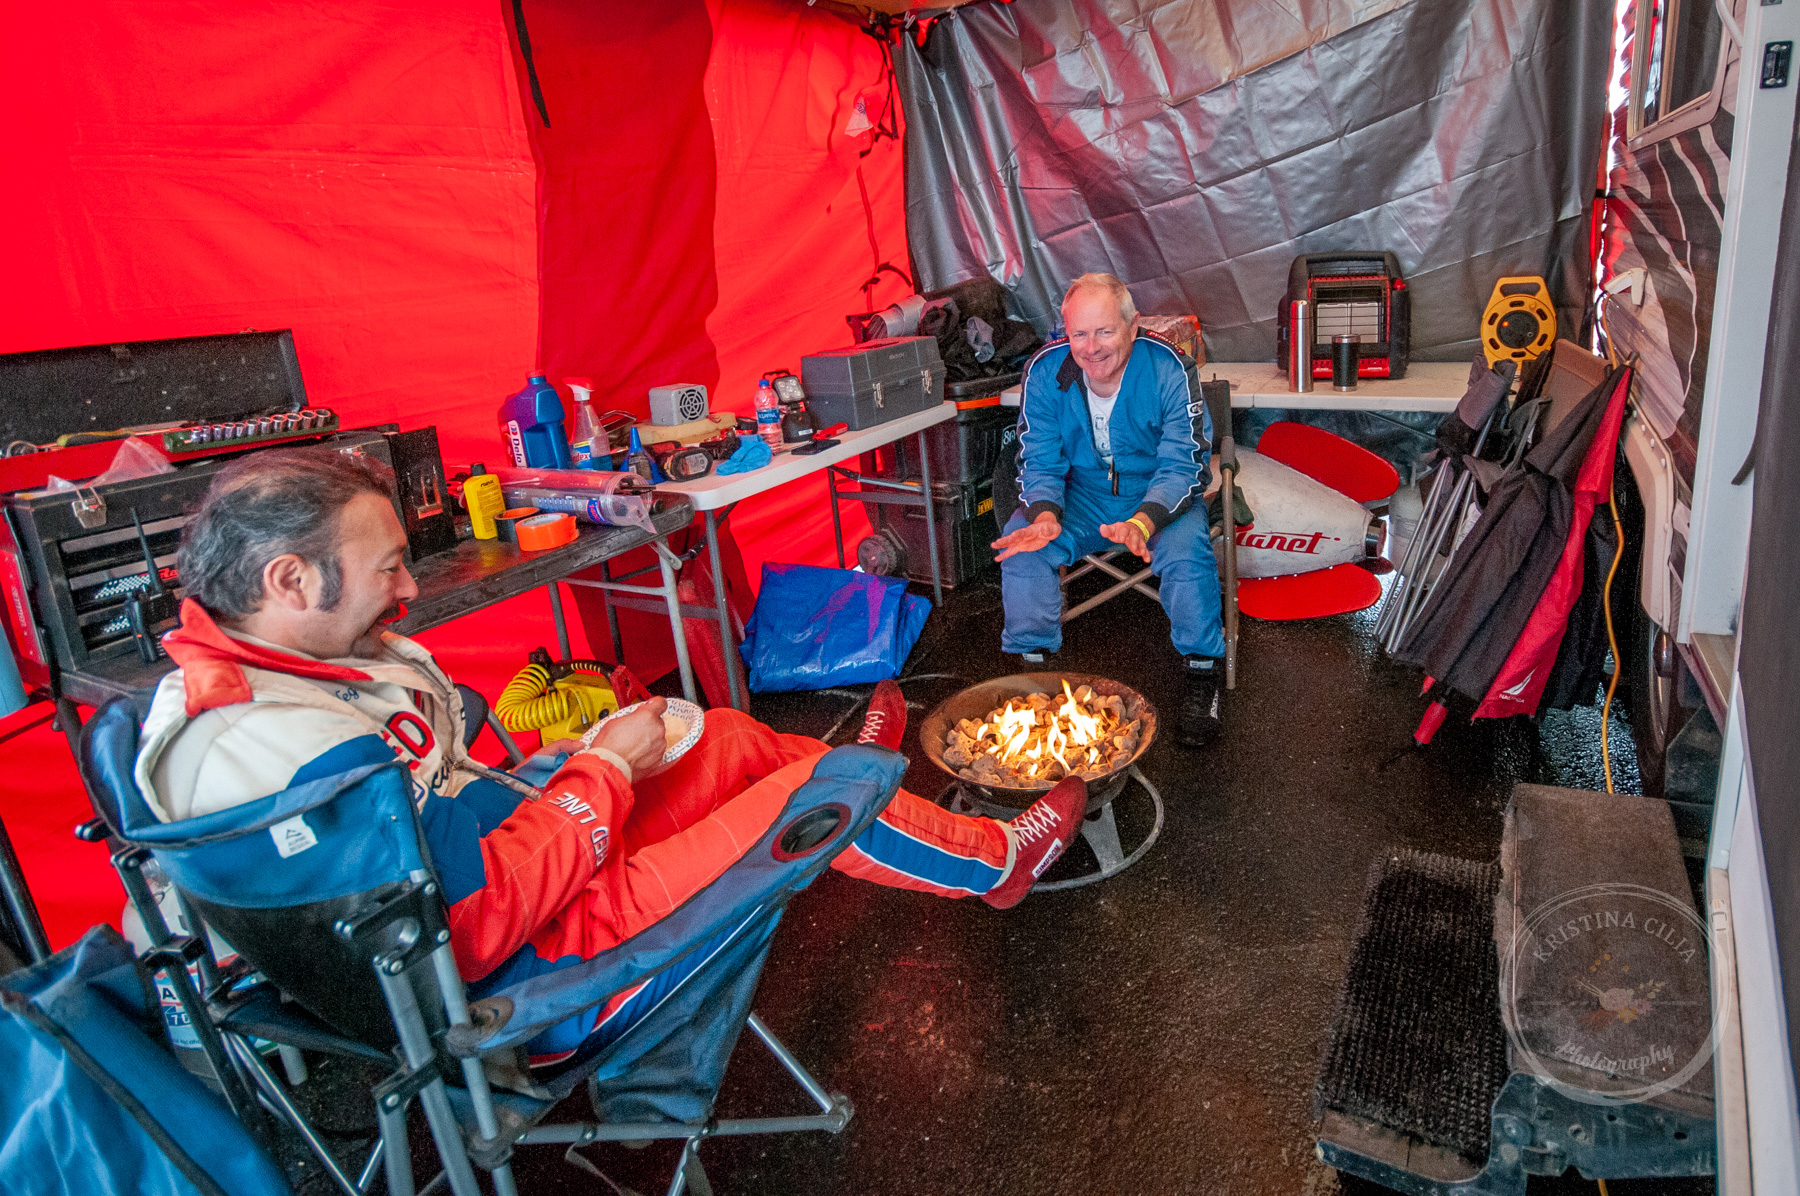 Pizza Planet Truck Racing Team keeps warm while taking a break in the Paddock Kristina Cilia